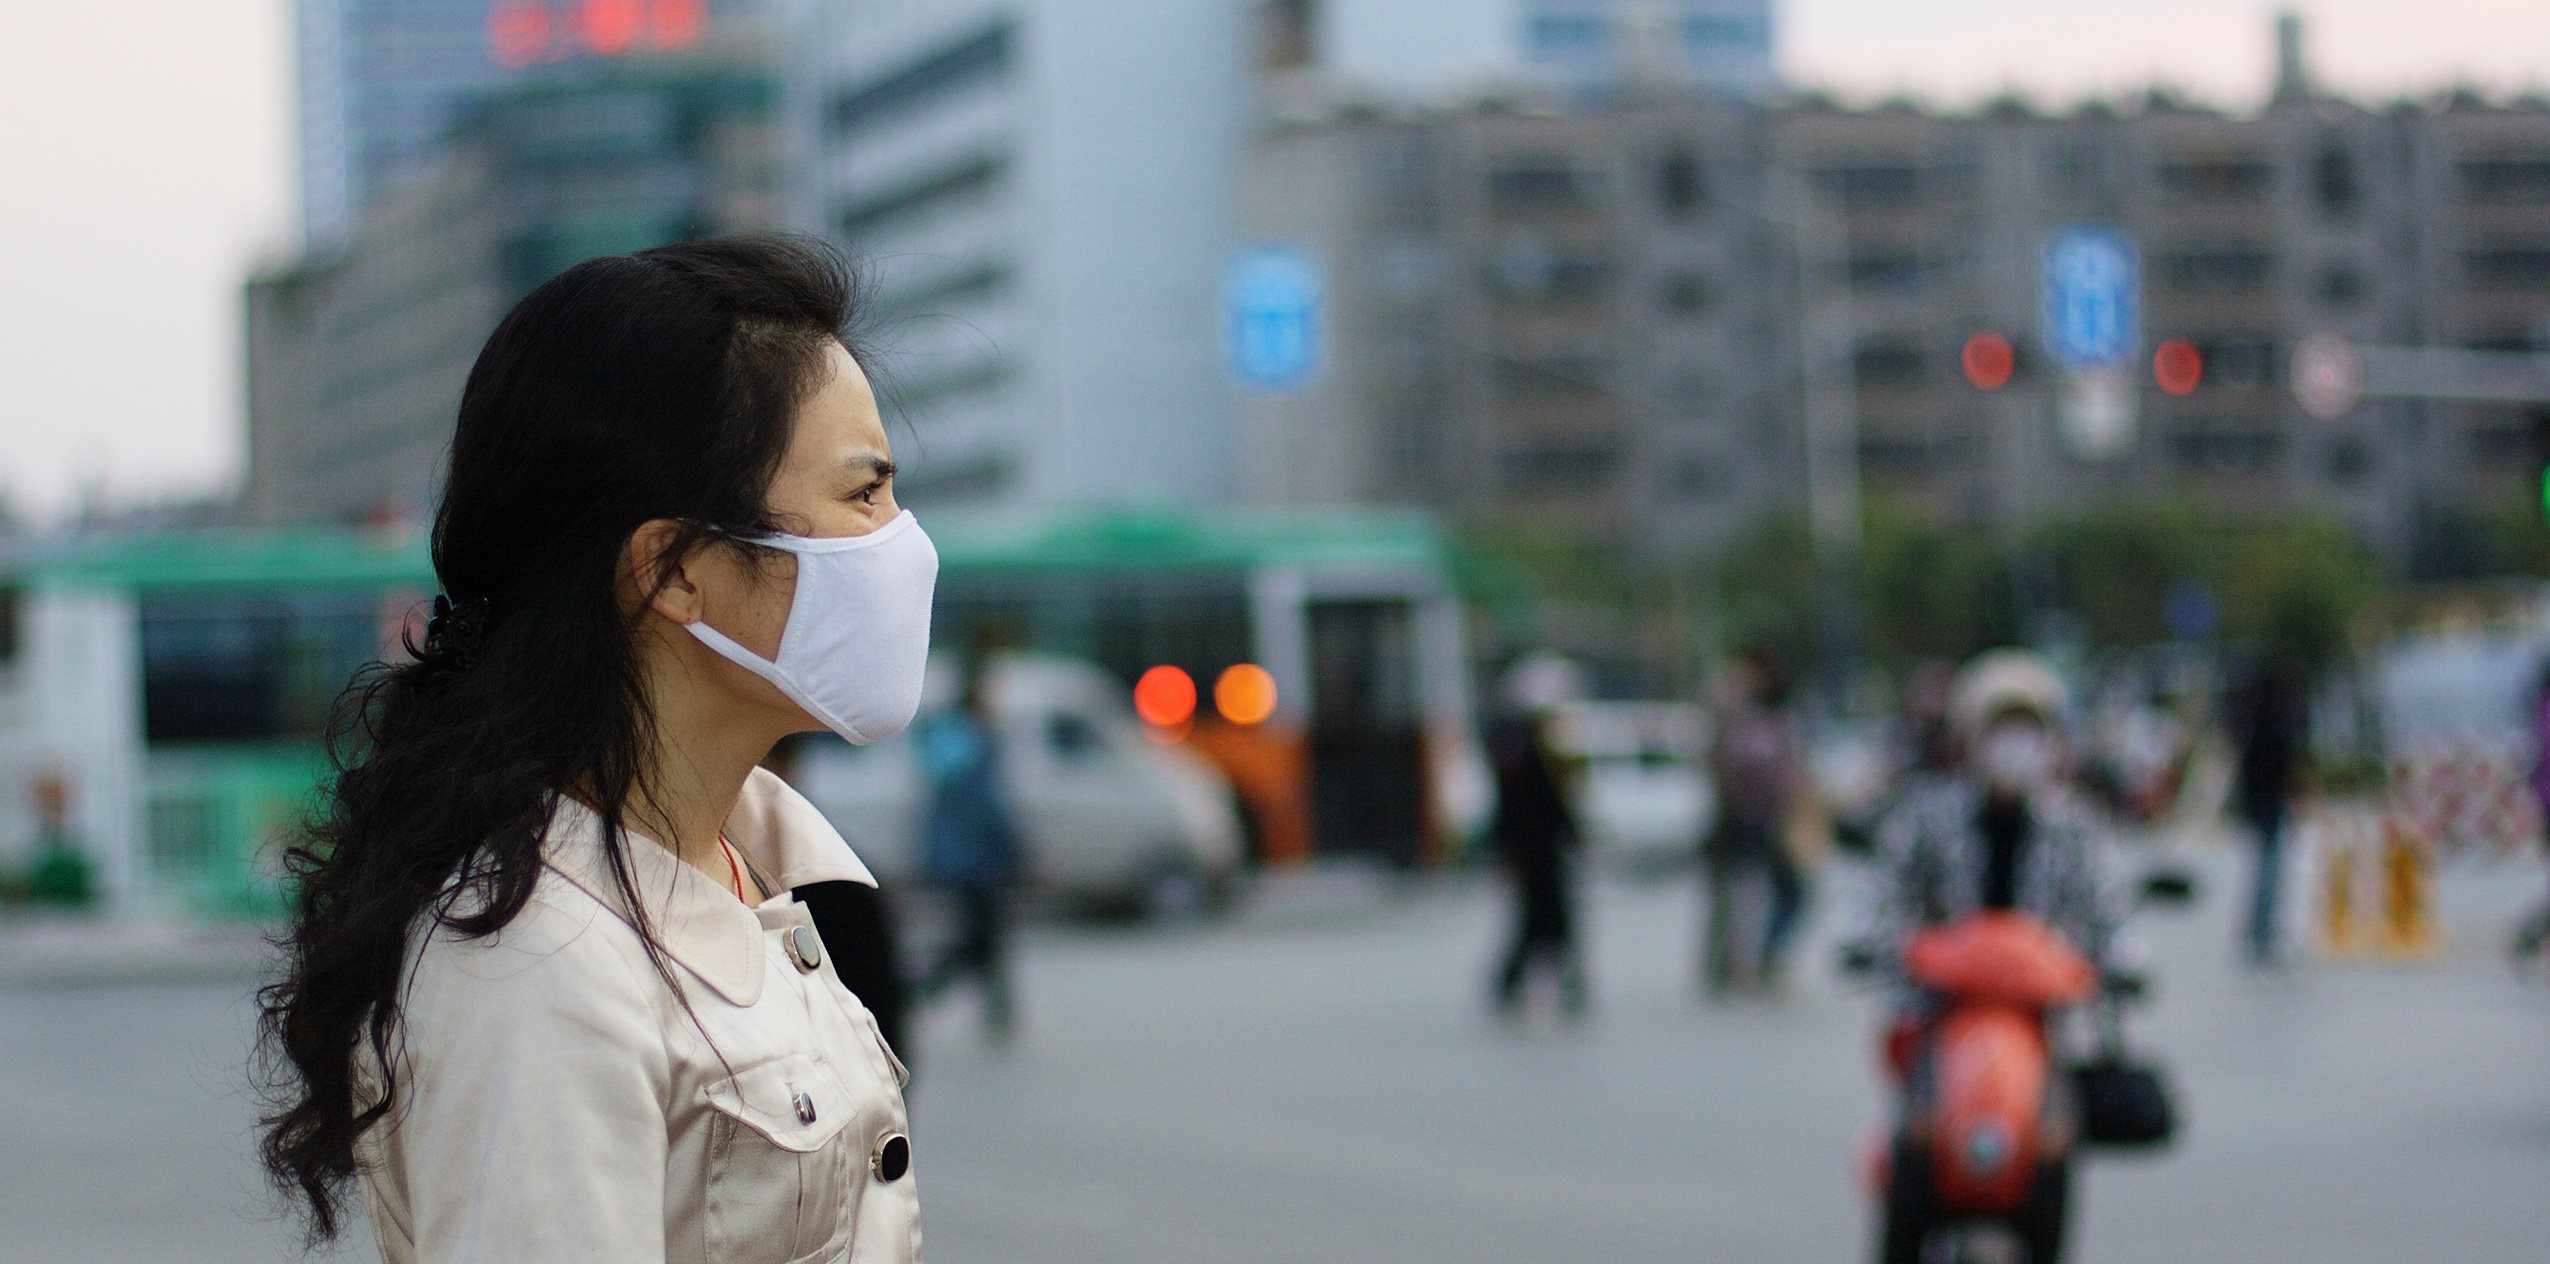 Lady wearing a protective face mask against pollution